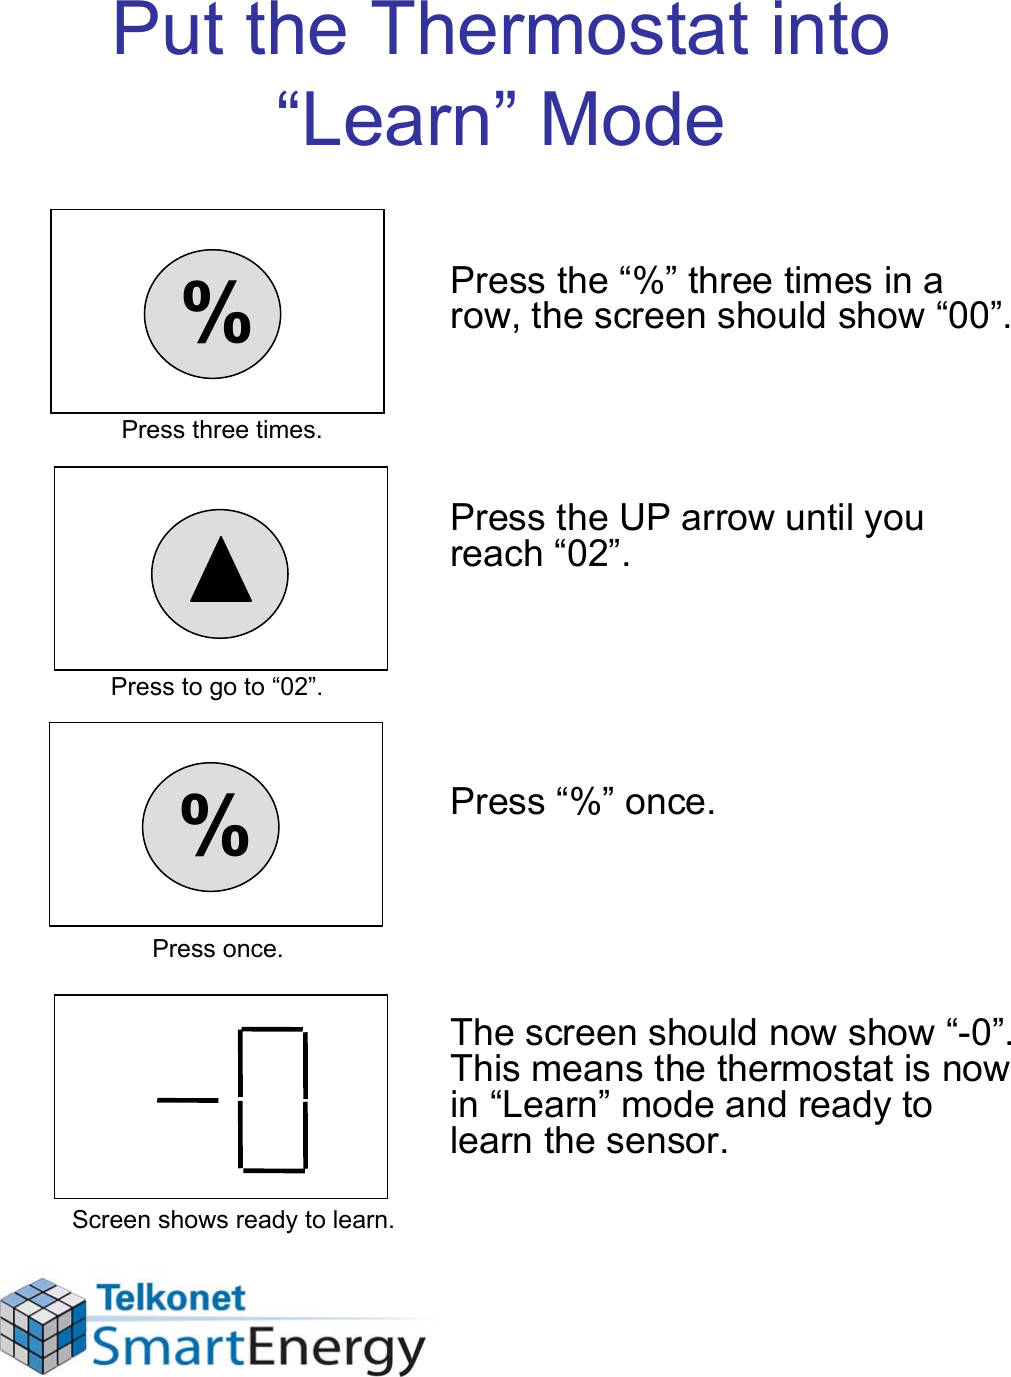 Put the Thermostat into “Learn” ModePress the “%” three times in a row, the screen should show “00”. Press the UP arrow until you reach “02”.Press “%” once.The screen should now show “-0”. This means the thermostat is now in “Learn” mode and ready to learn the sensor.%Press three times.Press to go to “02”.%Press once.Screen shows ready to learn.